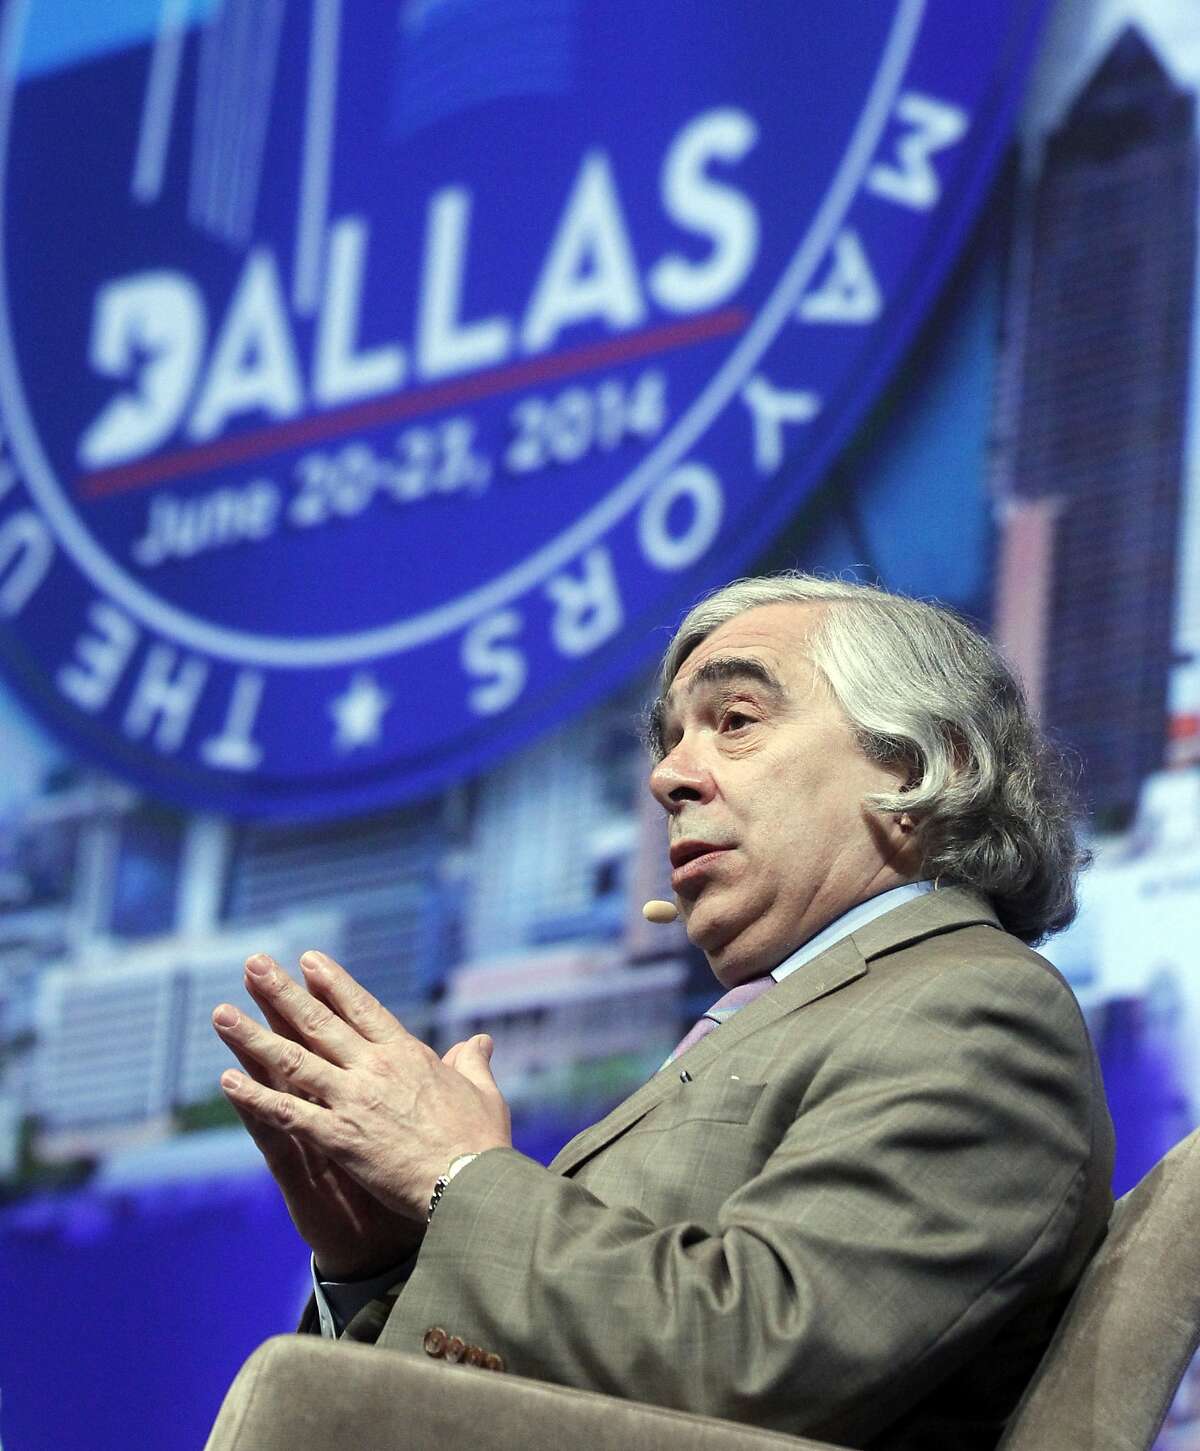 Ernest Moniz, secretary, United States Dept. of Energy, discusses climate protection at the U.S. Conference of Mayors in Dallas, on Sunday, June 22, 2014.